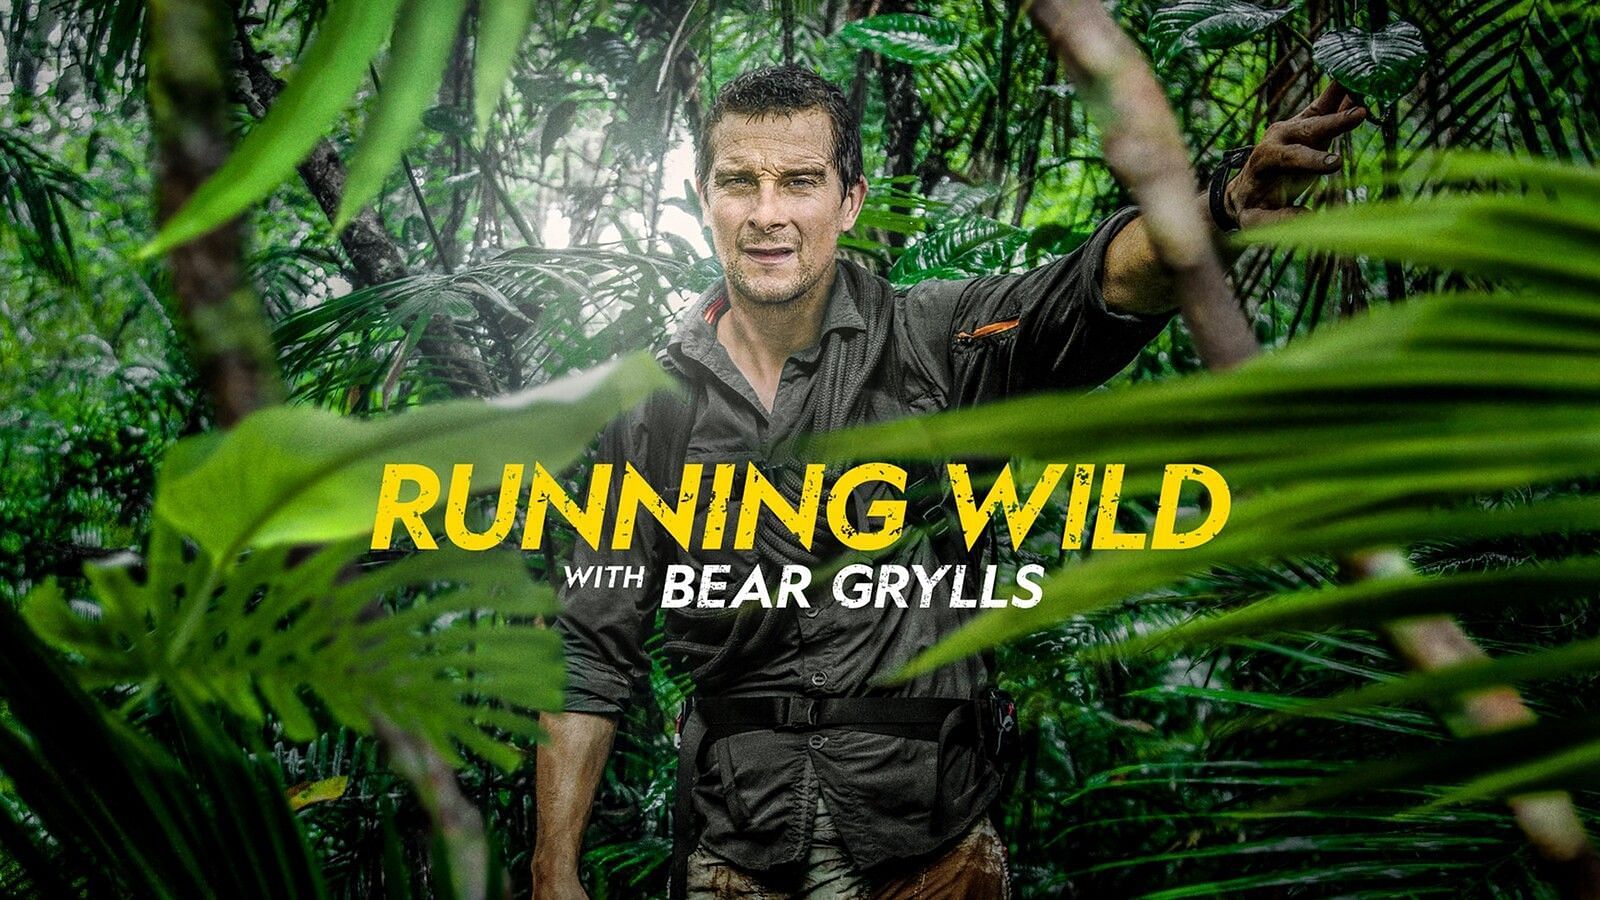 Running Wild with Bear Grylls (Image via National Geographic)